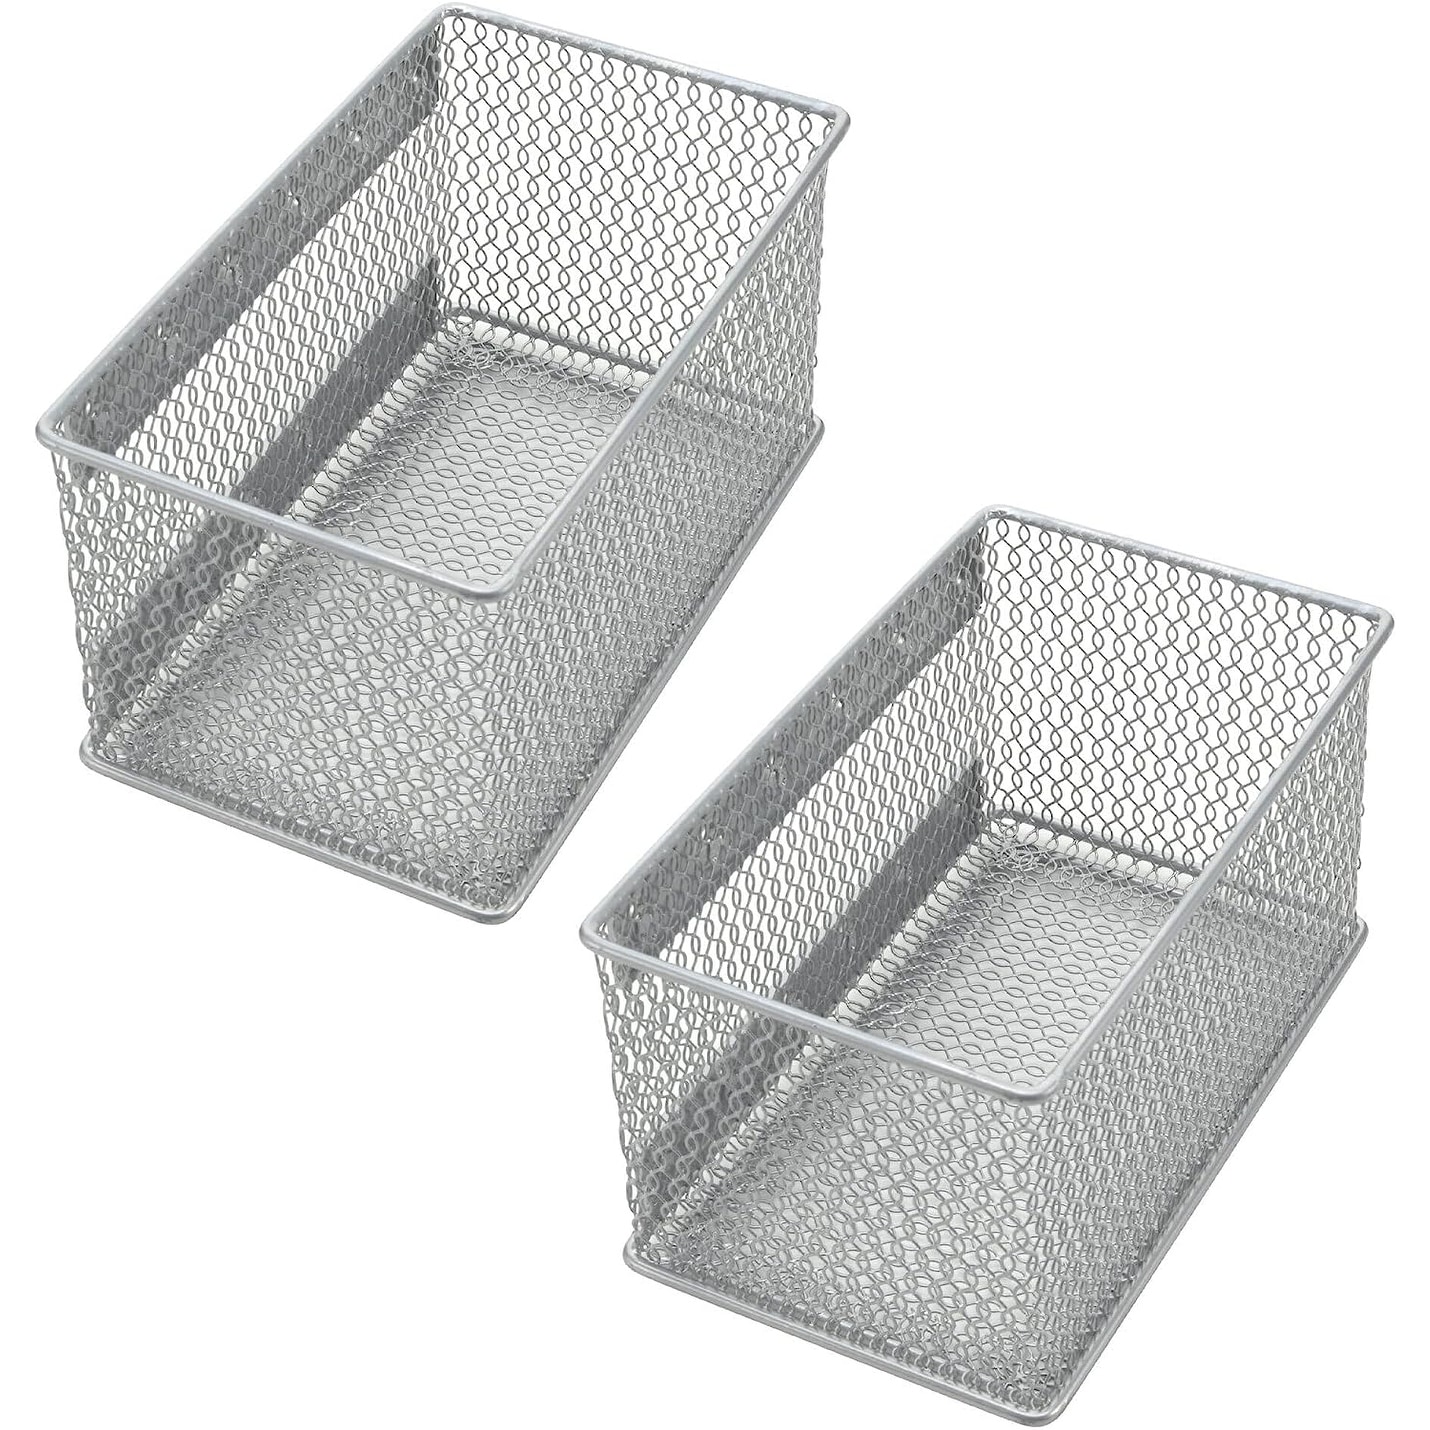 YBM Home Wire Mesh Magnetic Storage Basket Trash Caddy Office Supply Organizer Silver 7.75 in. L x 4.3 in. W x 4.3 in. H 2 Pack